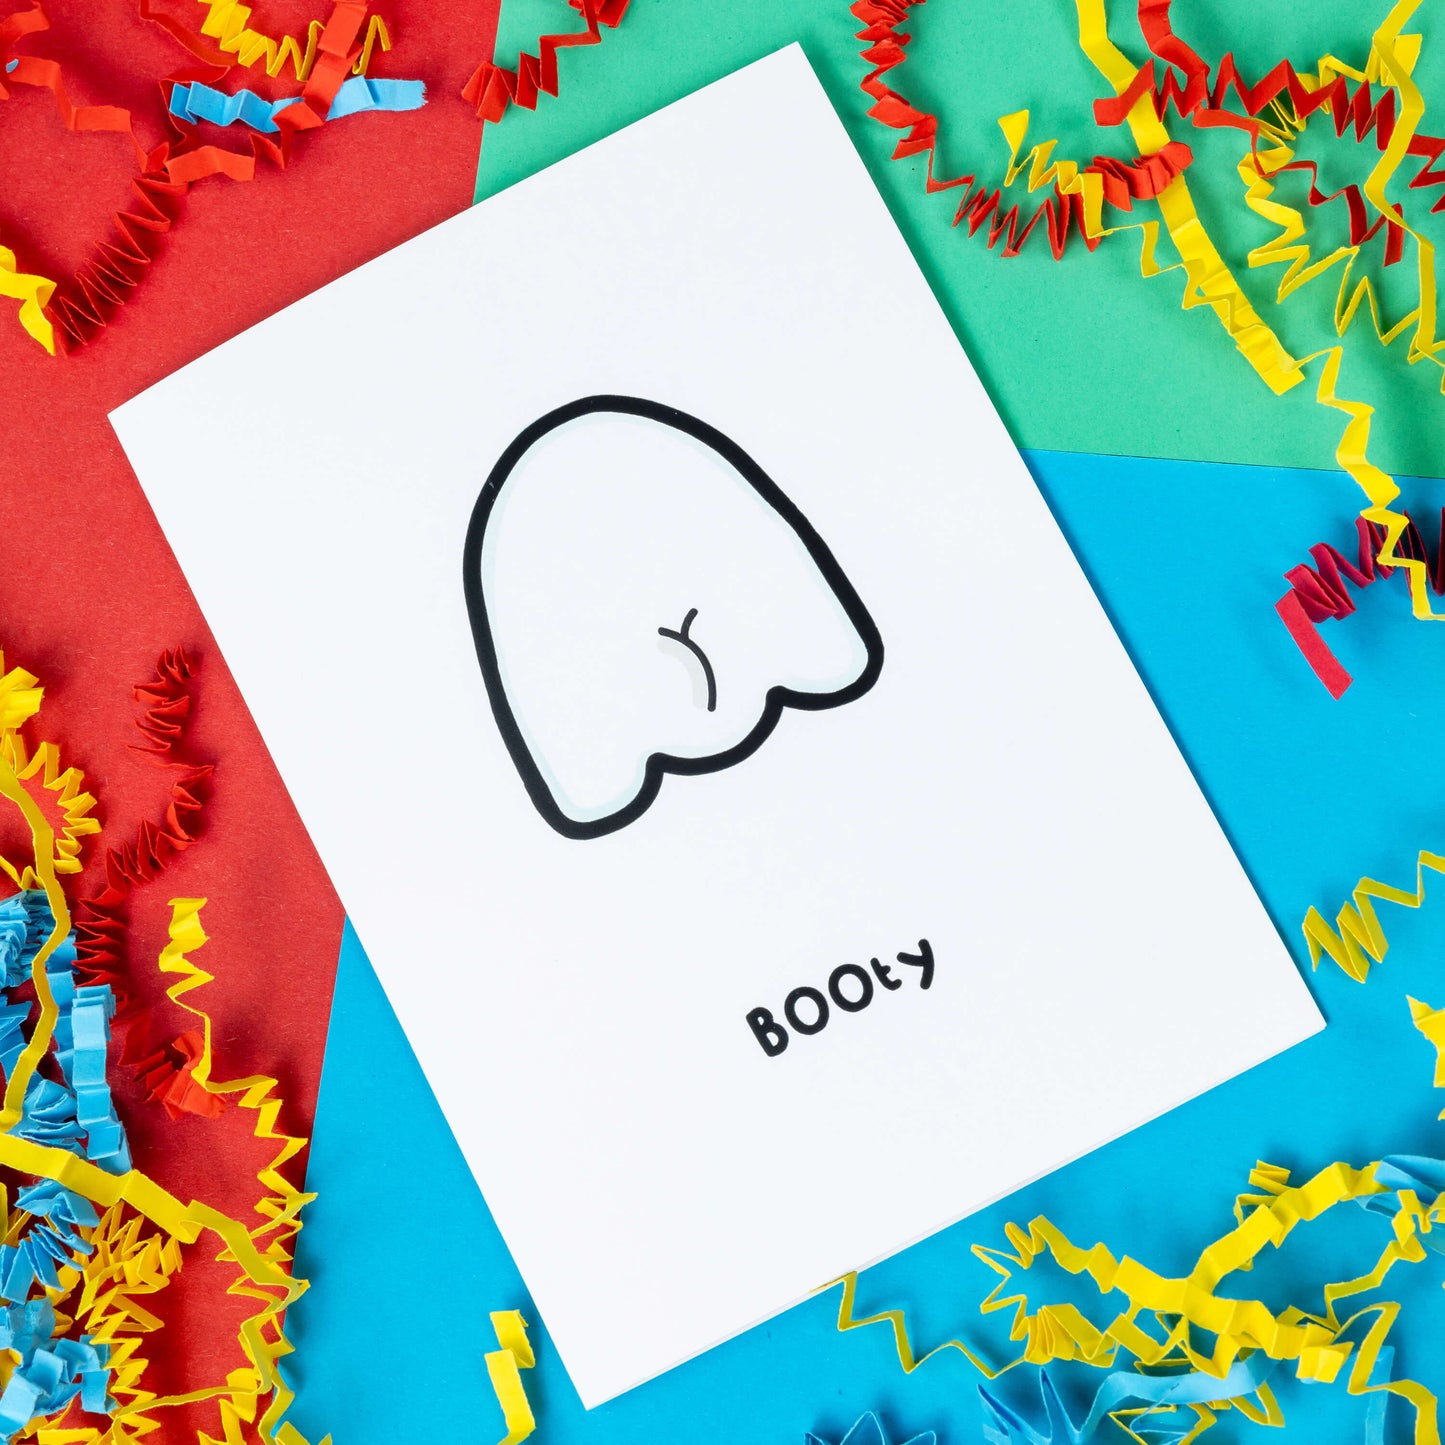 The Booty Ghost a6 card on a blue, red and green background with yellow, blue and red crinkle card confetti. A white greeting card with an illustration of the back of a ghost with a bum crack. The word 'BOOty" is written in black underneath the drawing.